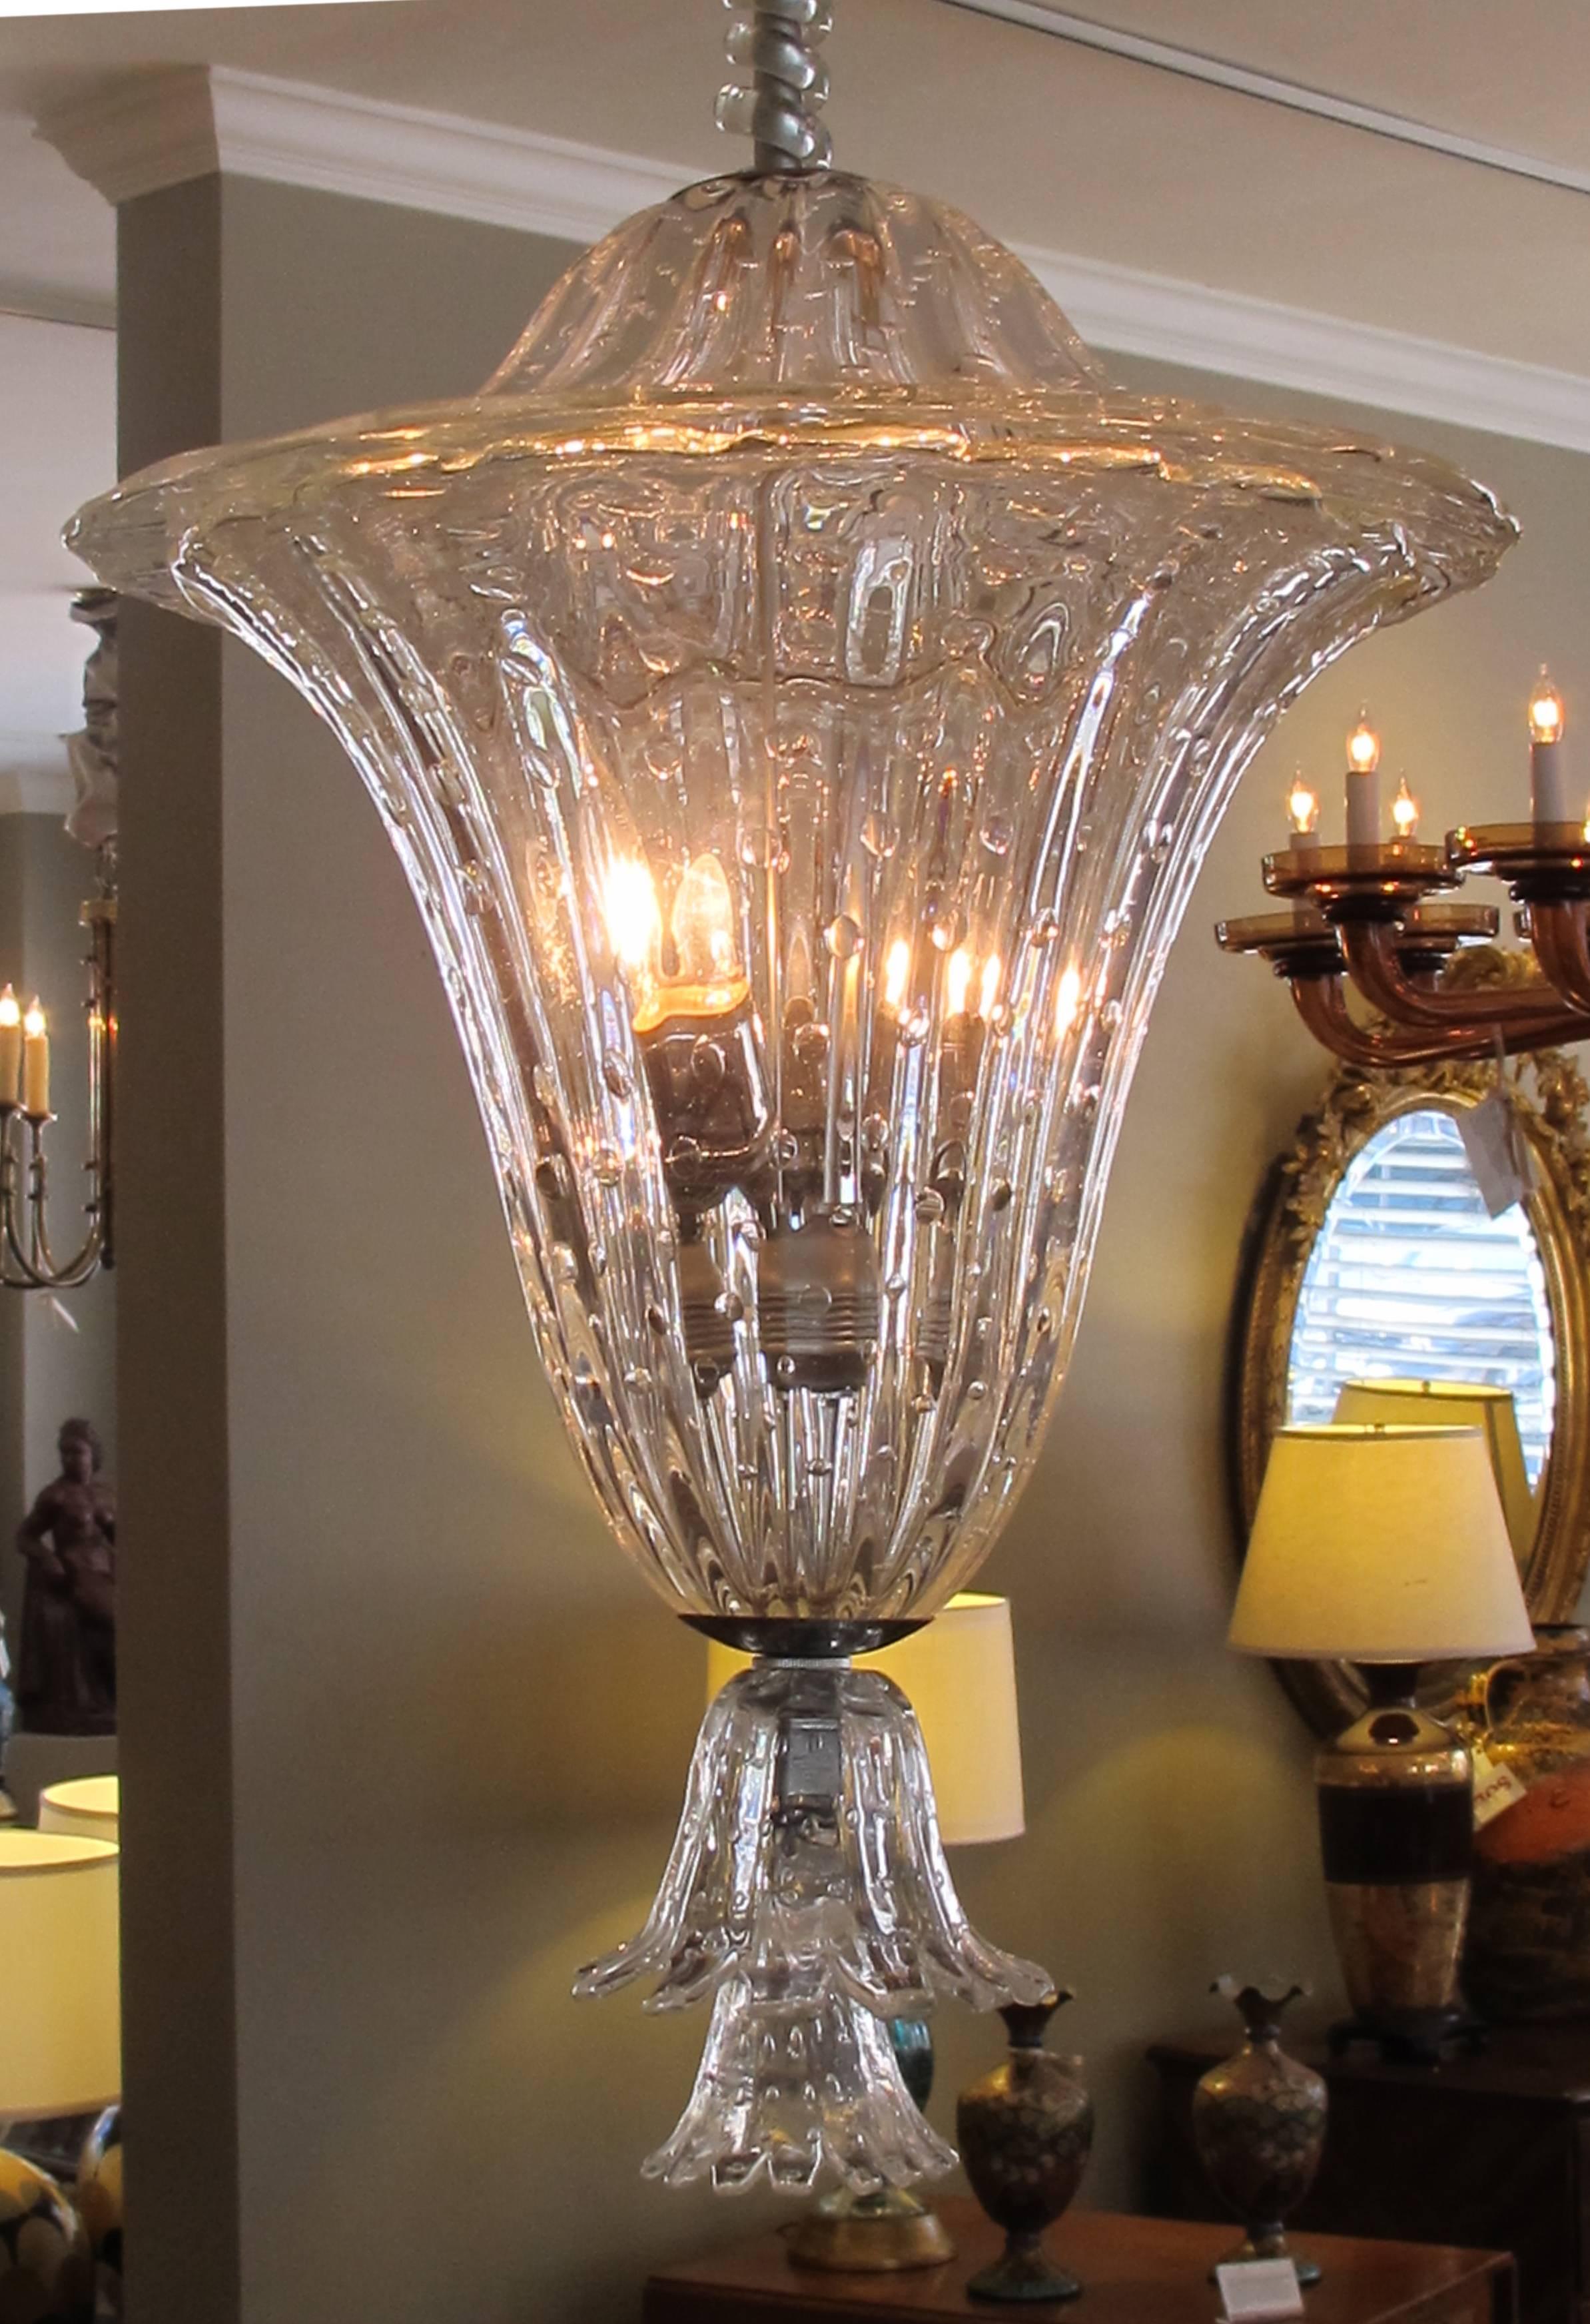 A large and superb quality Murano midcentury clear glass bullicante lantern or pendant light by Seguso bullicante glass lantern made in Venice by Seguso having a twisted central shaft above a domed lid over a flared tapering glass shade ending in